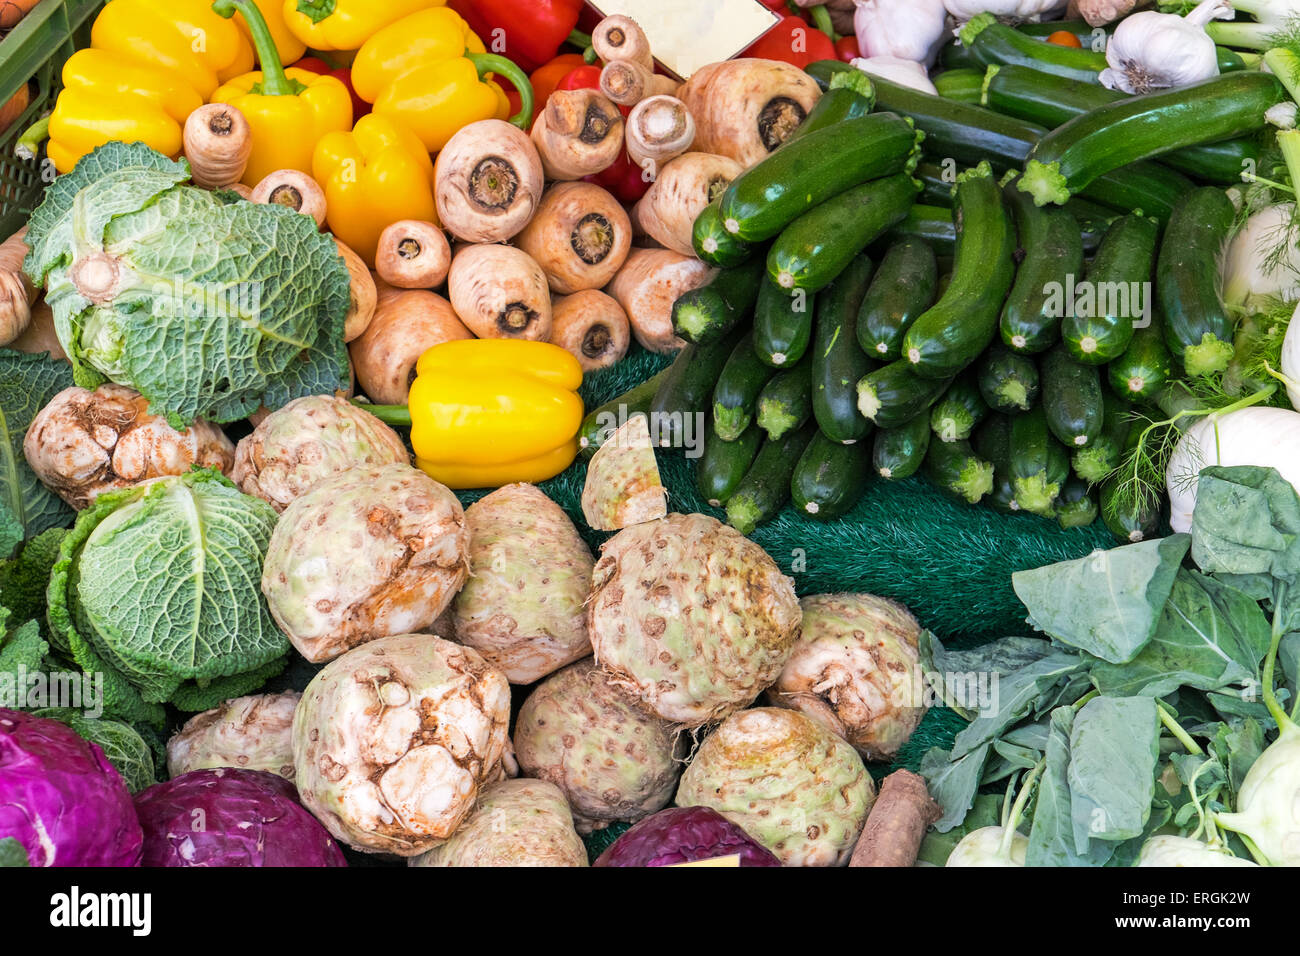 A selection of fresh vegetables seen on a market Stock Photo